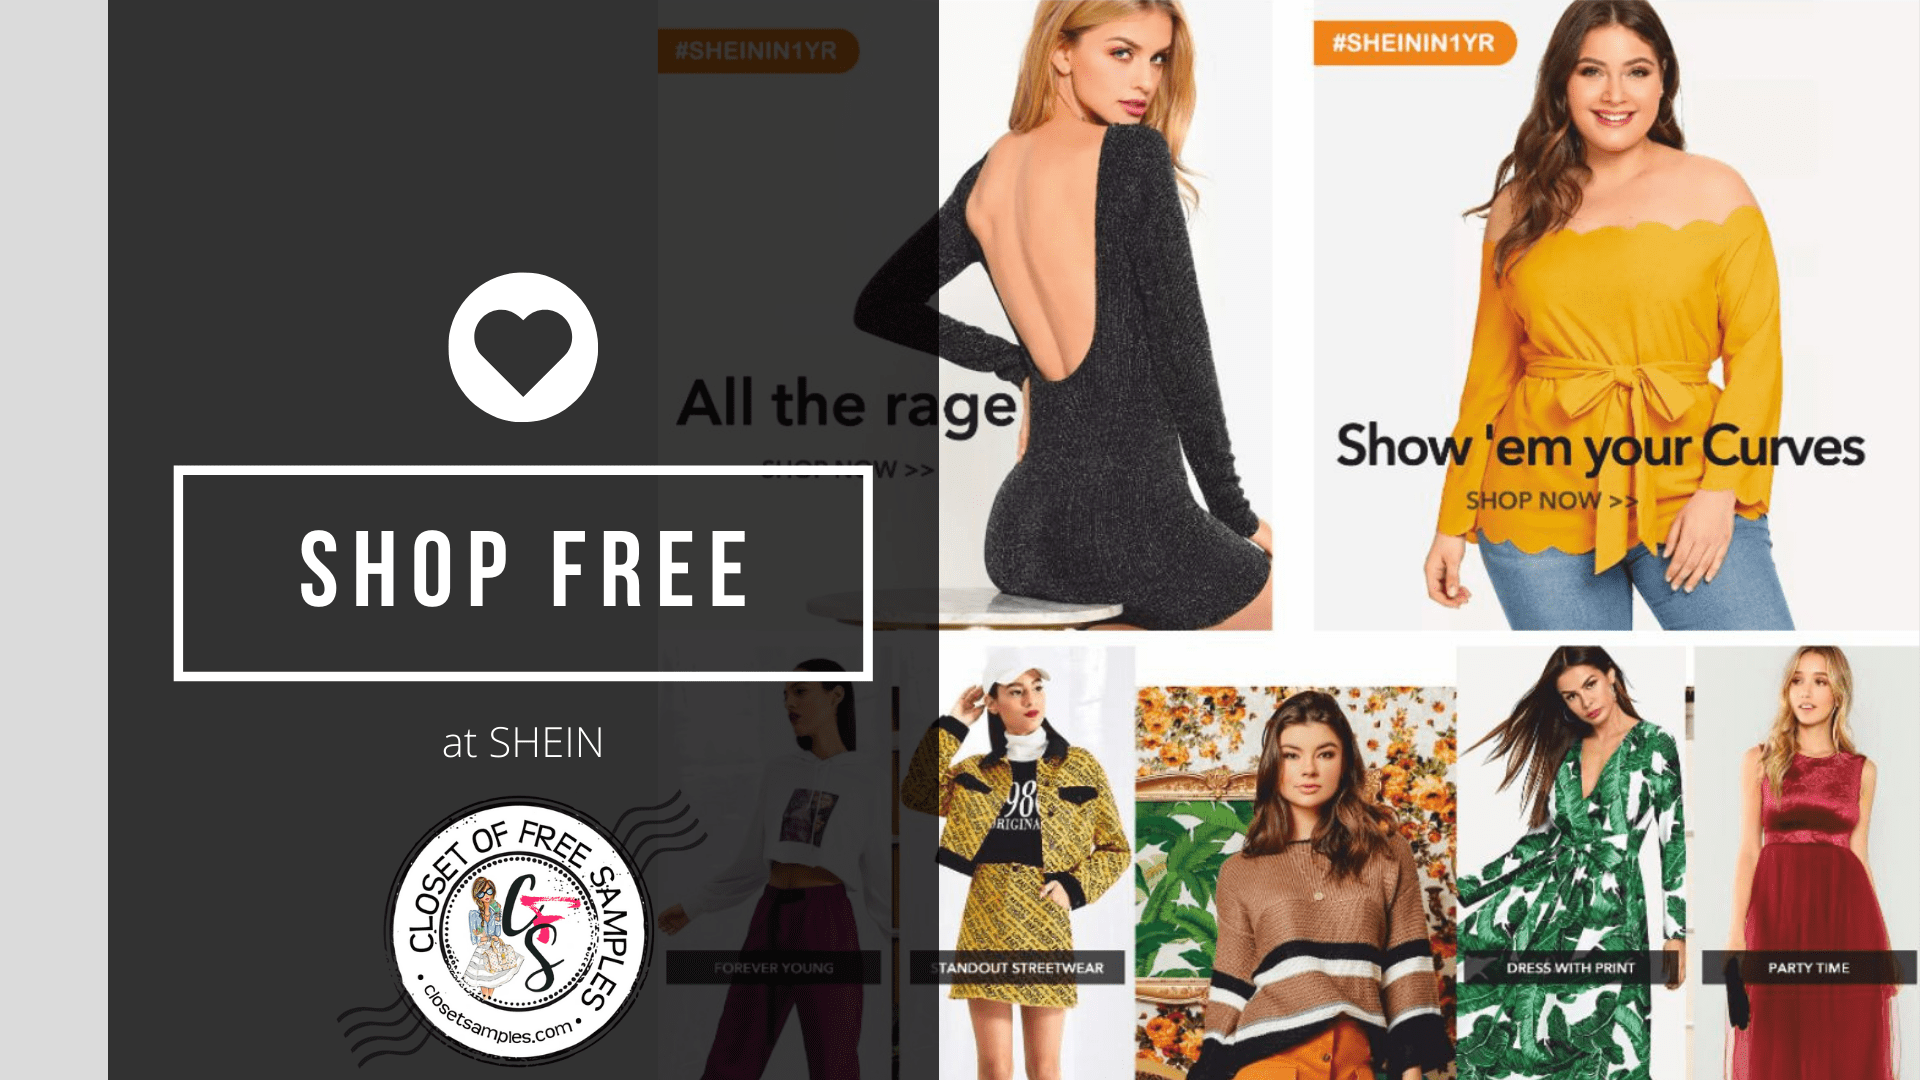 How to Get FREE Clothes from SHEIN